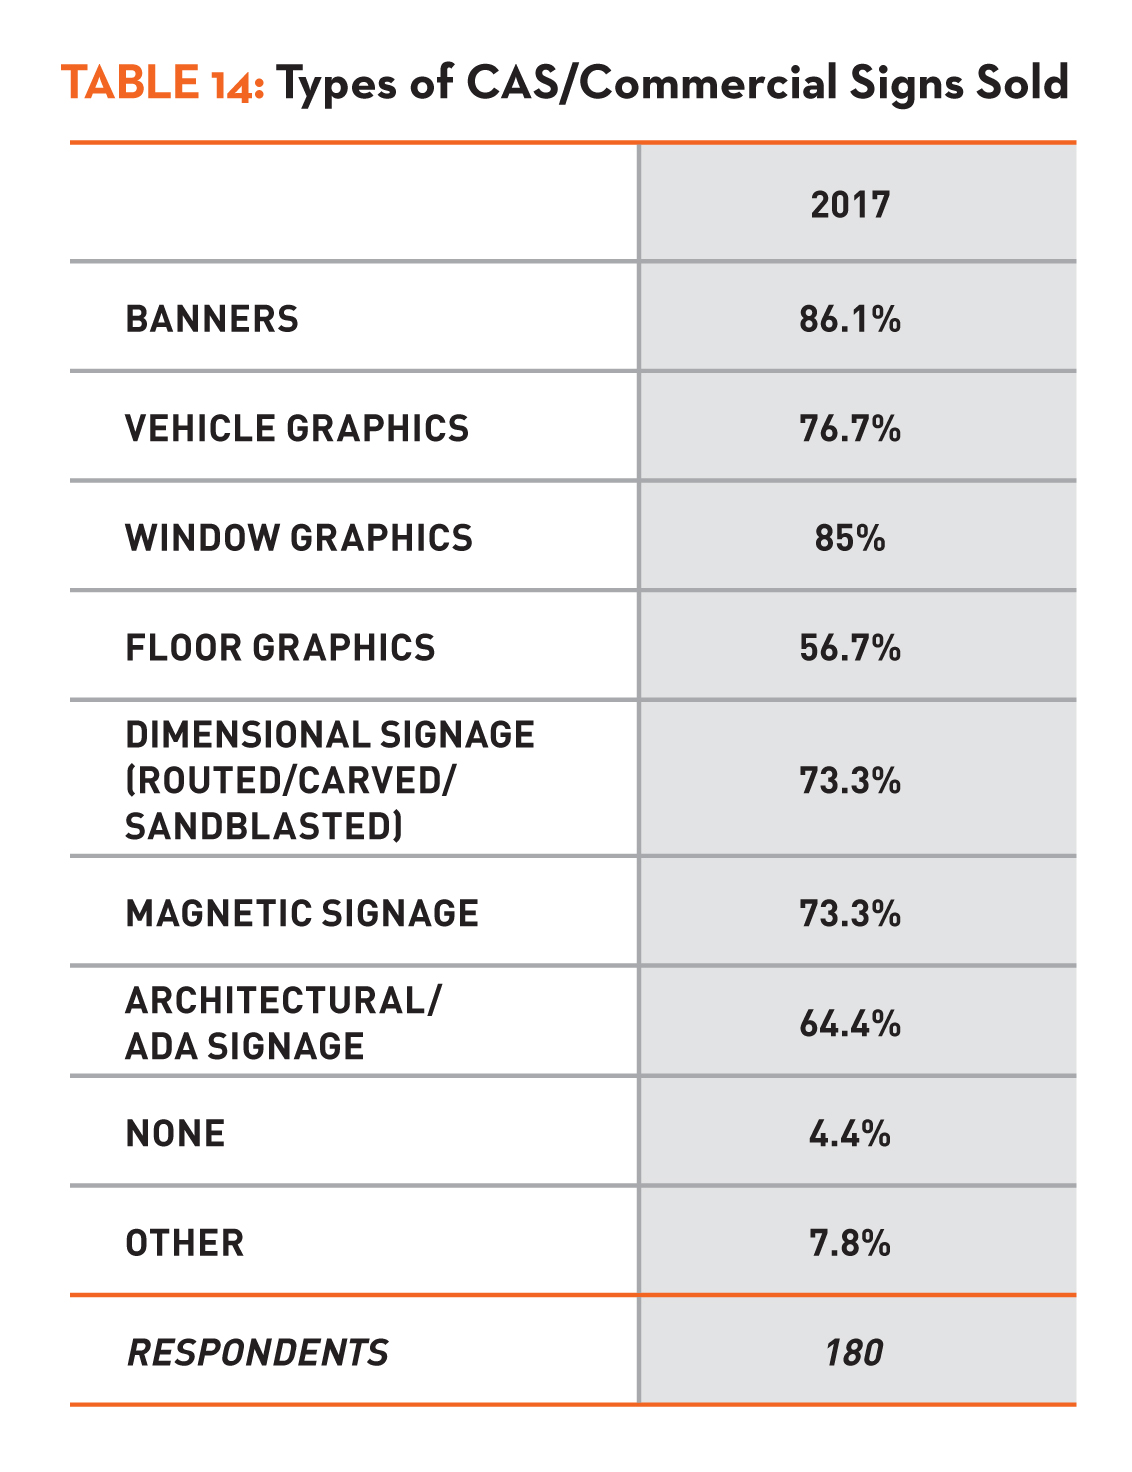 Table 14: Types of CAS/Commercial Signs Sold